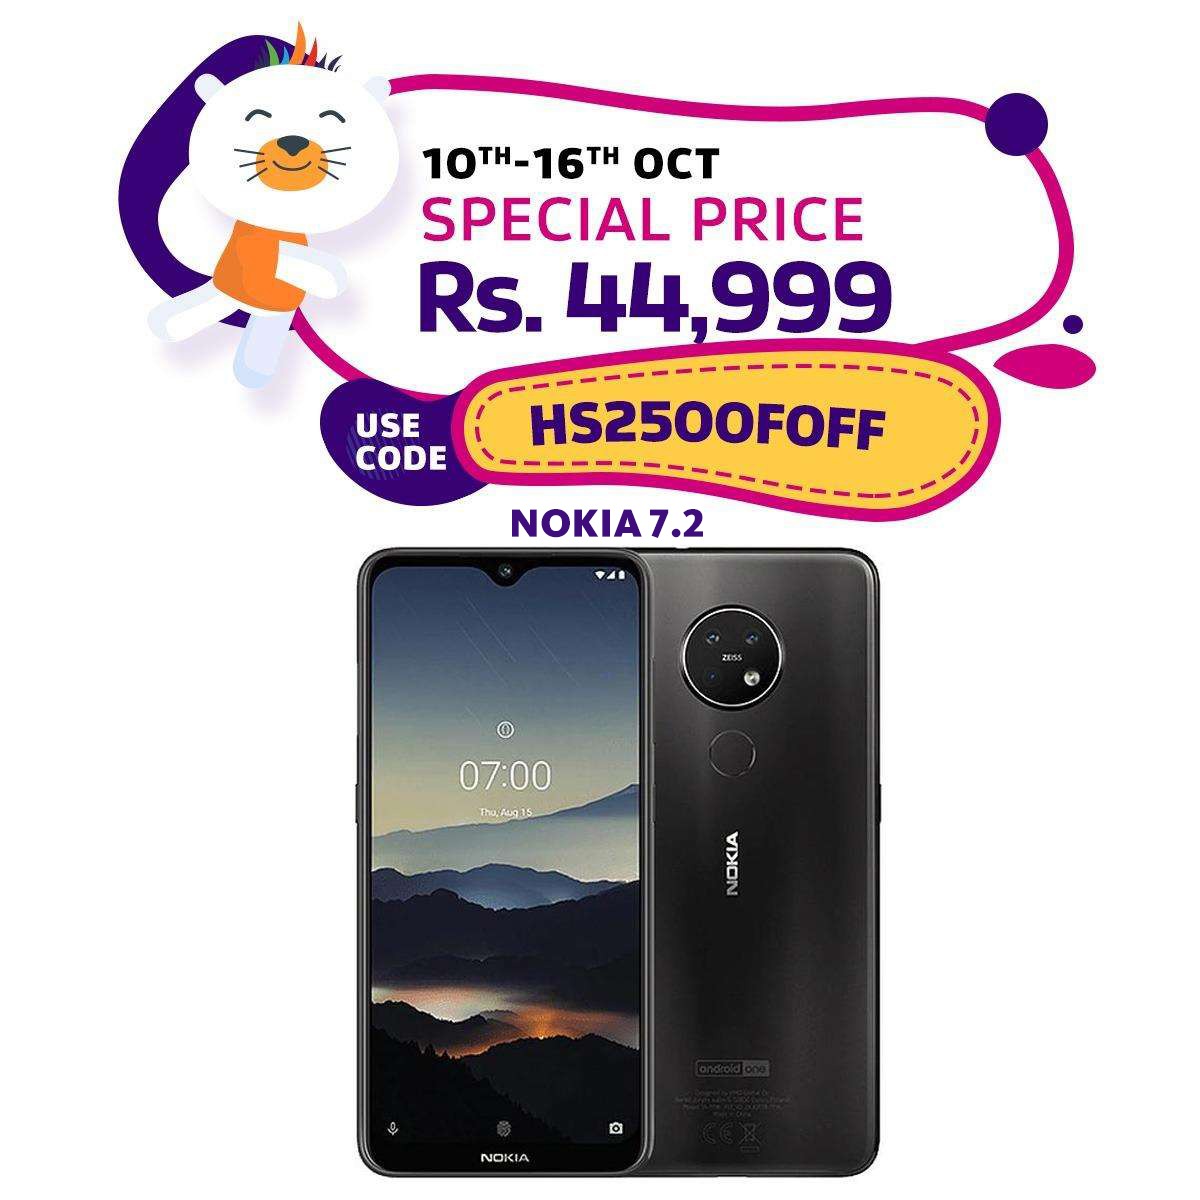 NOKIA 7.2 and 6.2 Available at Daraz.pk at an Amazing Price